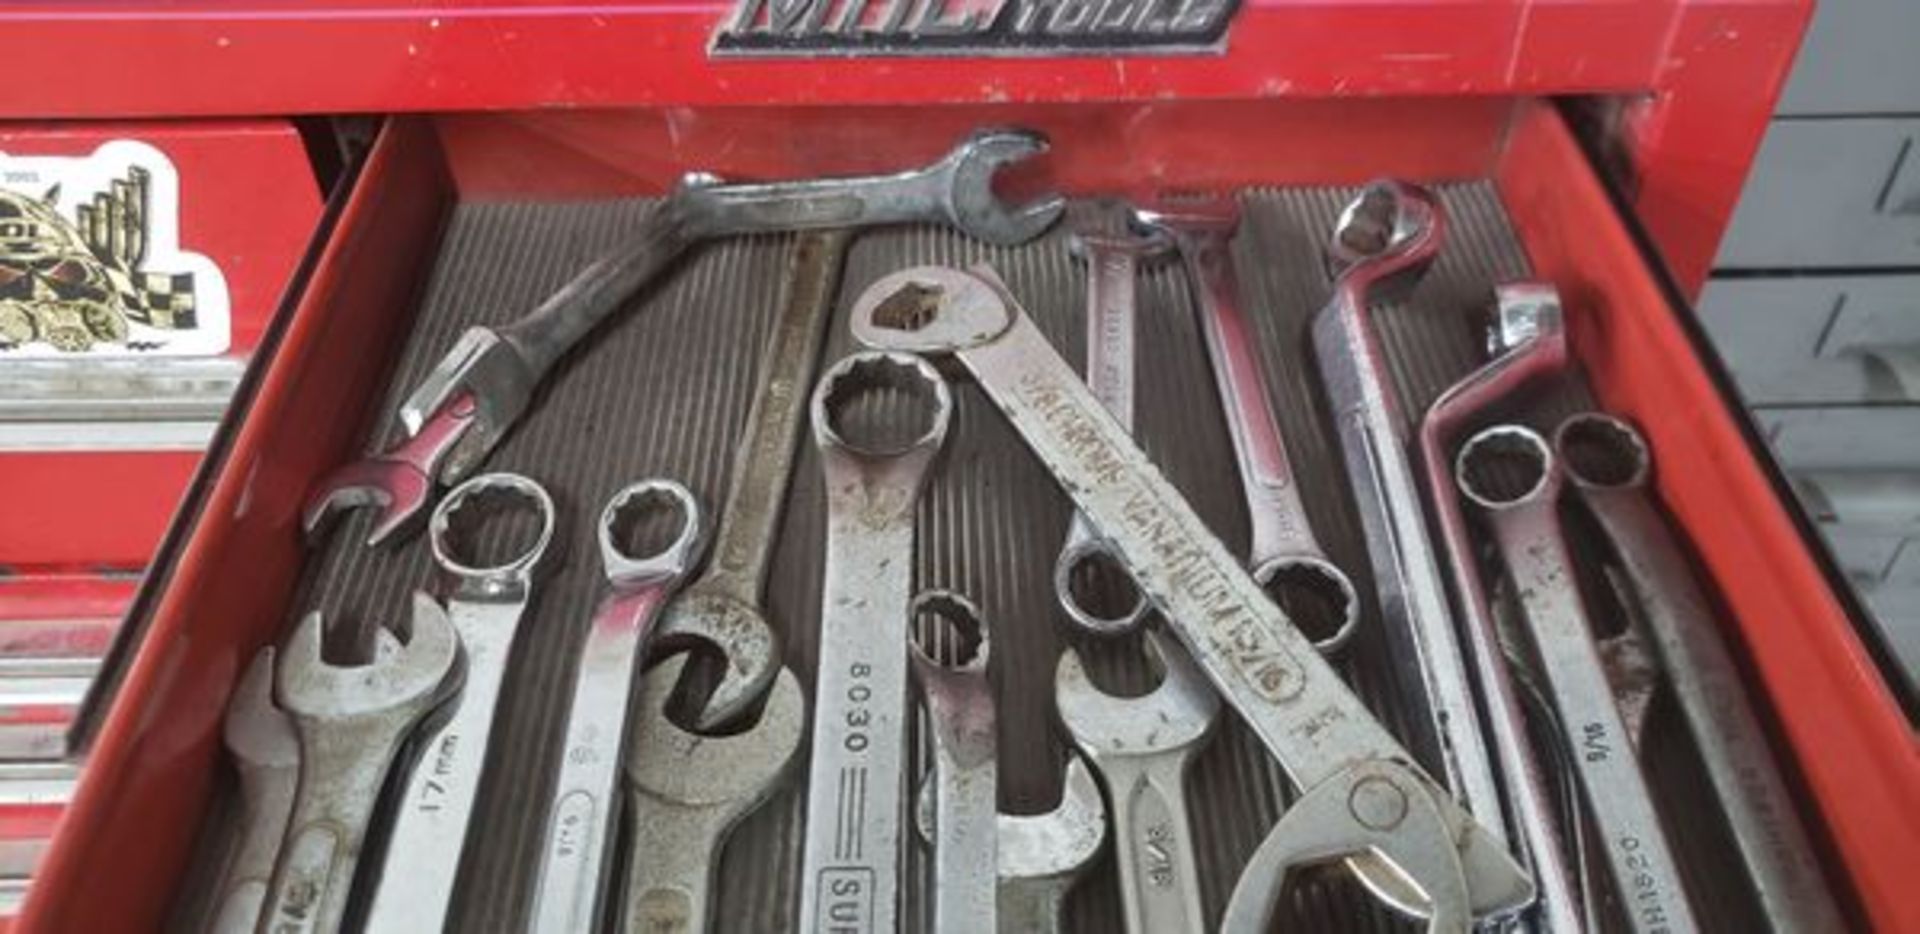 ASSORTED WRENCHES - Image 5 of 5